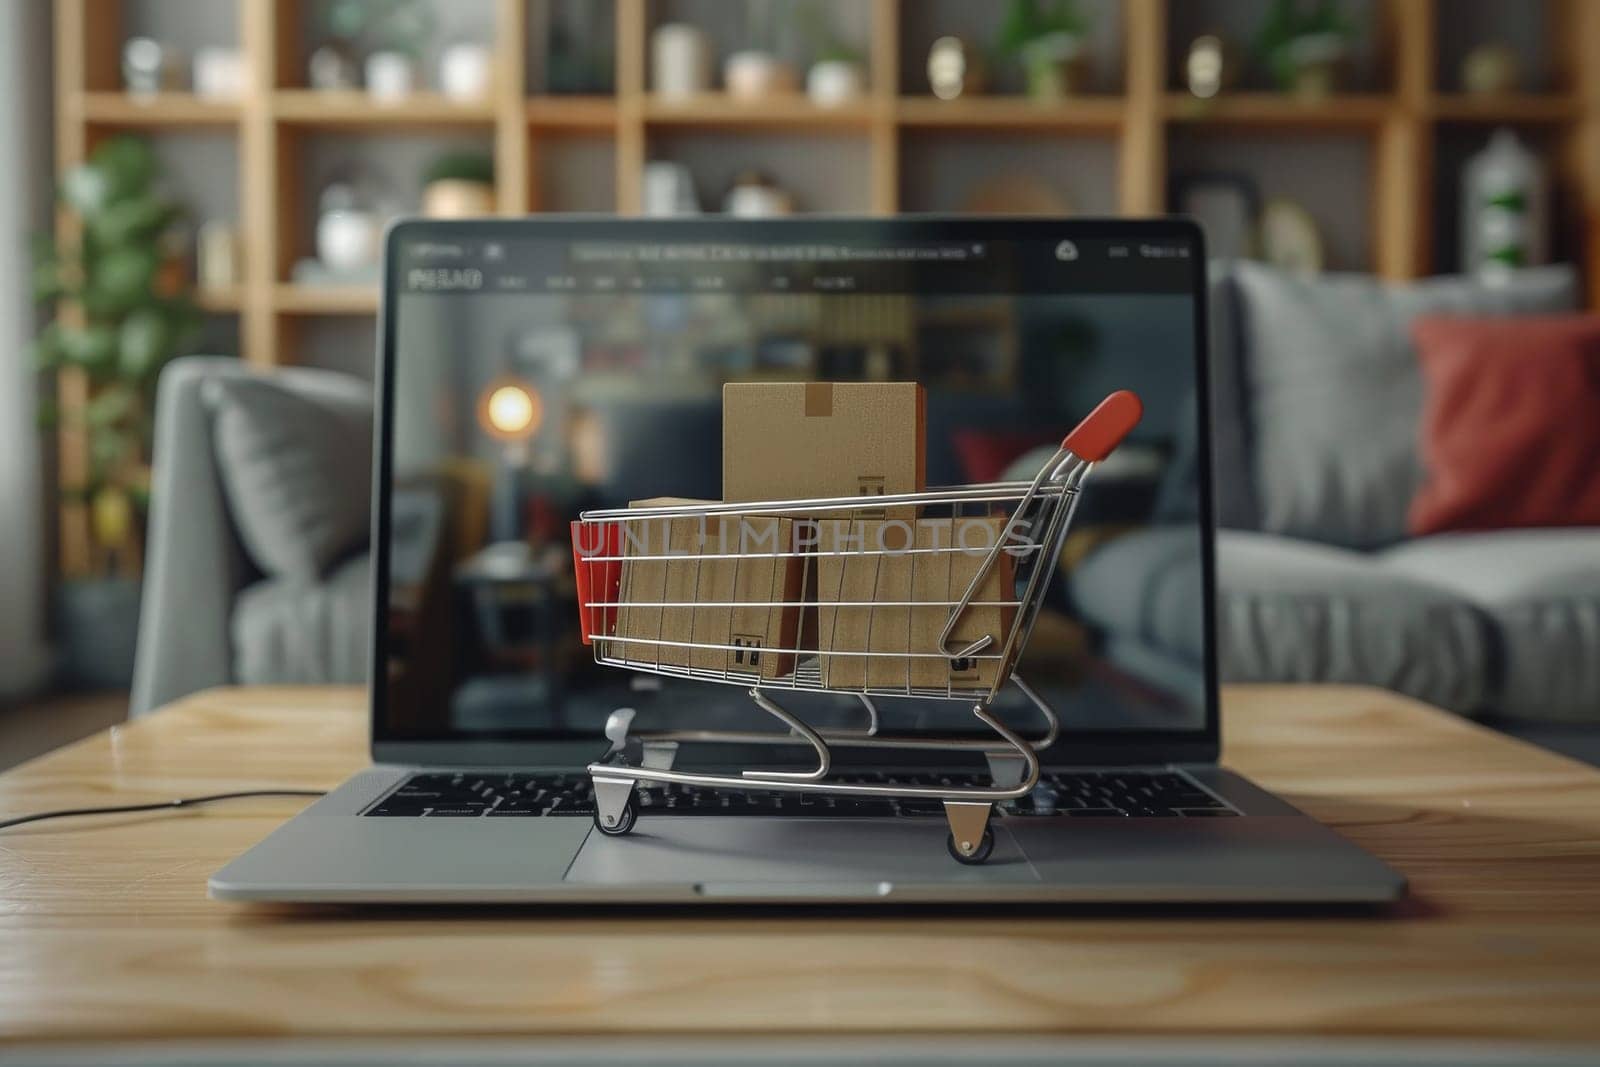 A laptop screen shows a shopping cart with boxes on it. The cart is on a wooden table in a living room